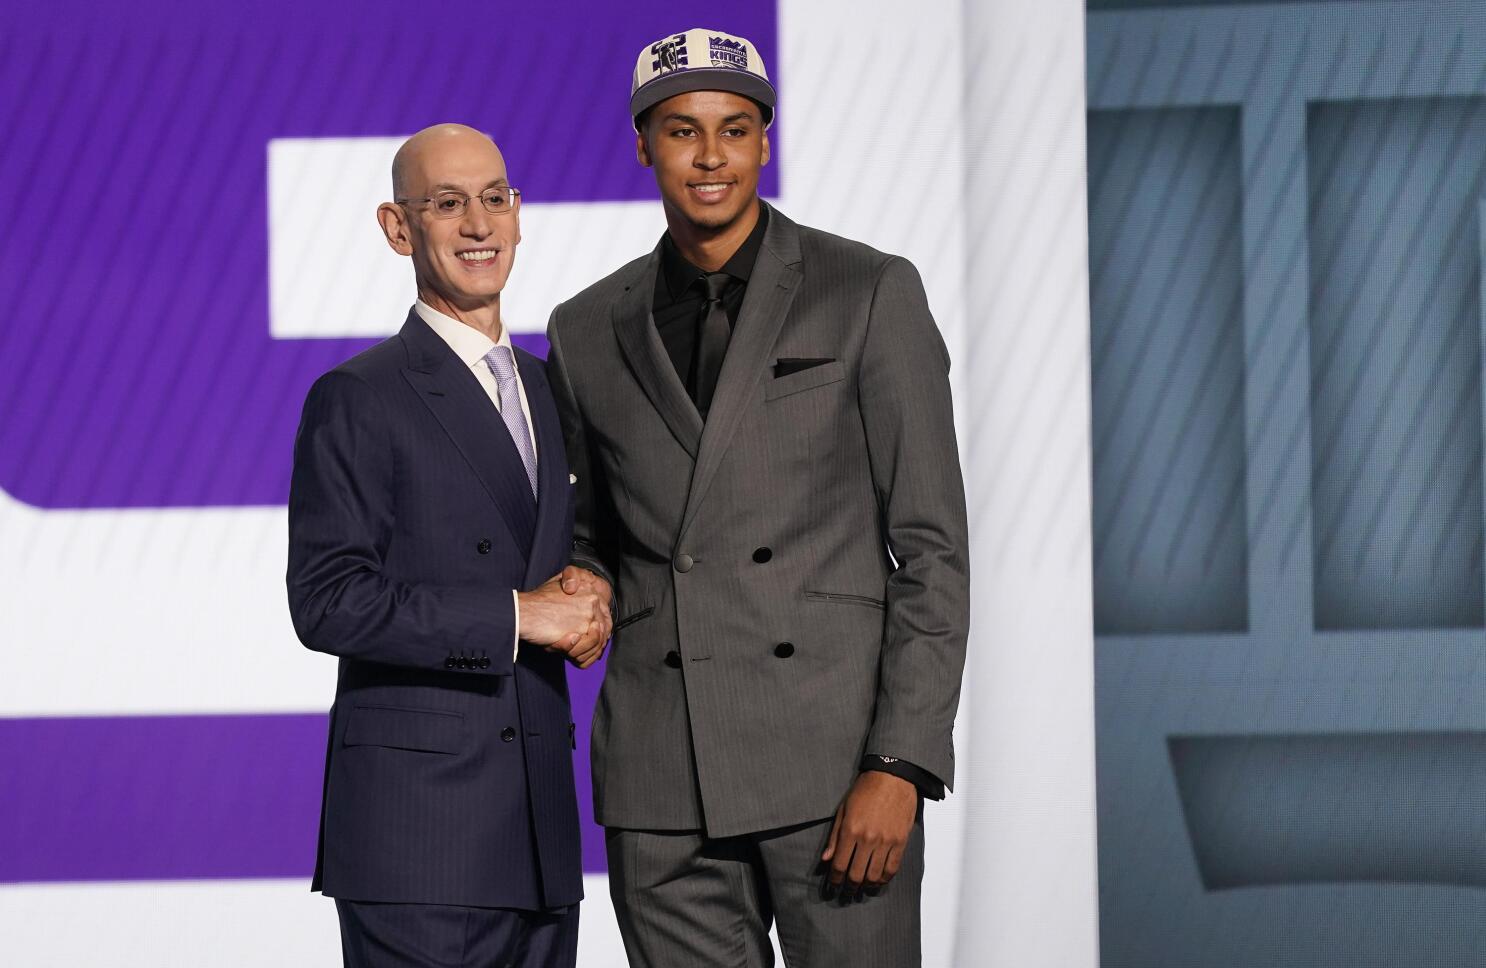 Kris Murray's photo was shown at the NBA Draft, not his brother Keegan